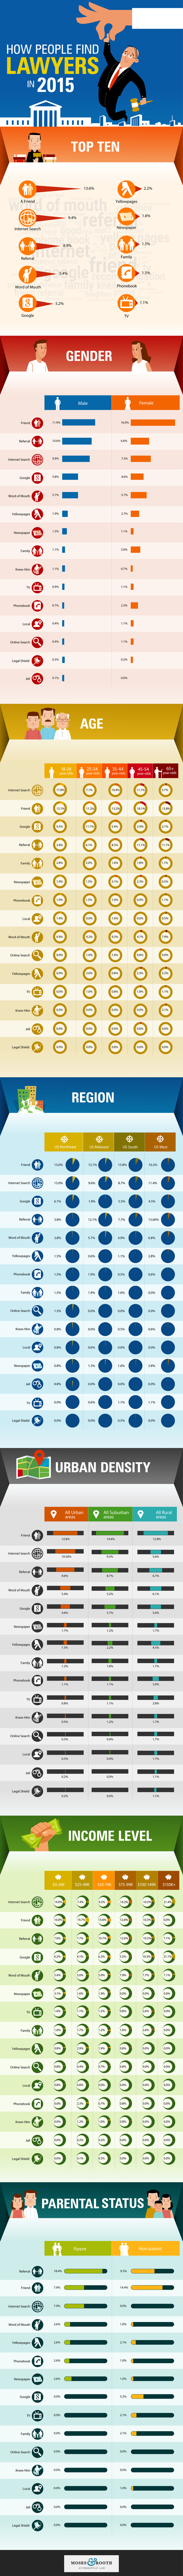 How-People-Find-Lawyers-2015-Survey-Infographic